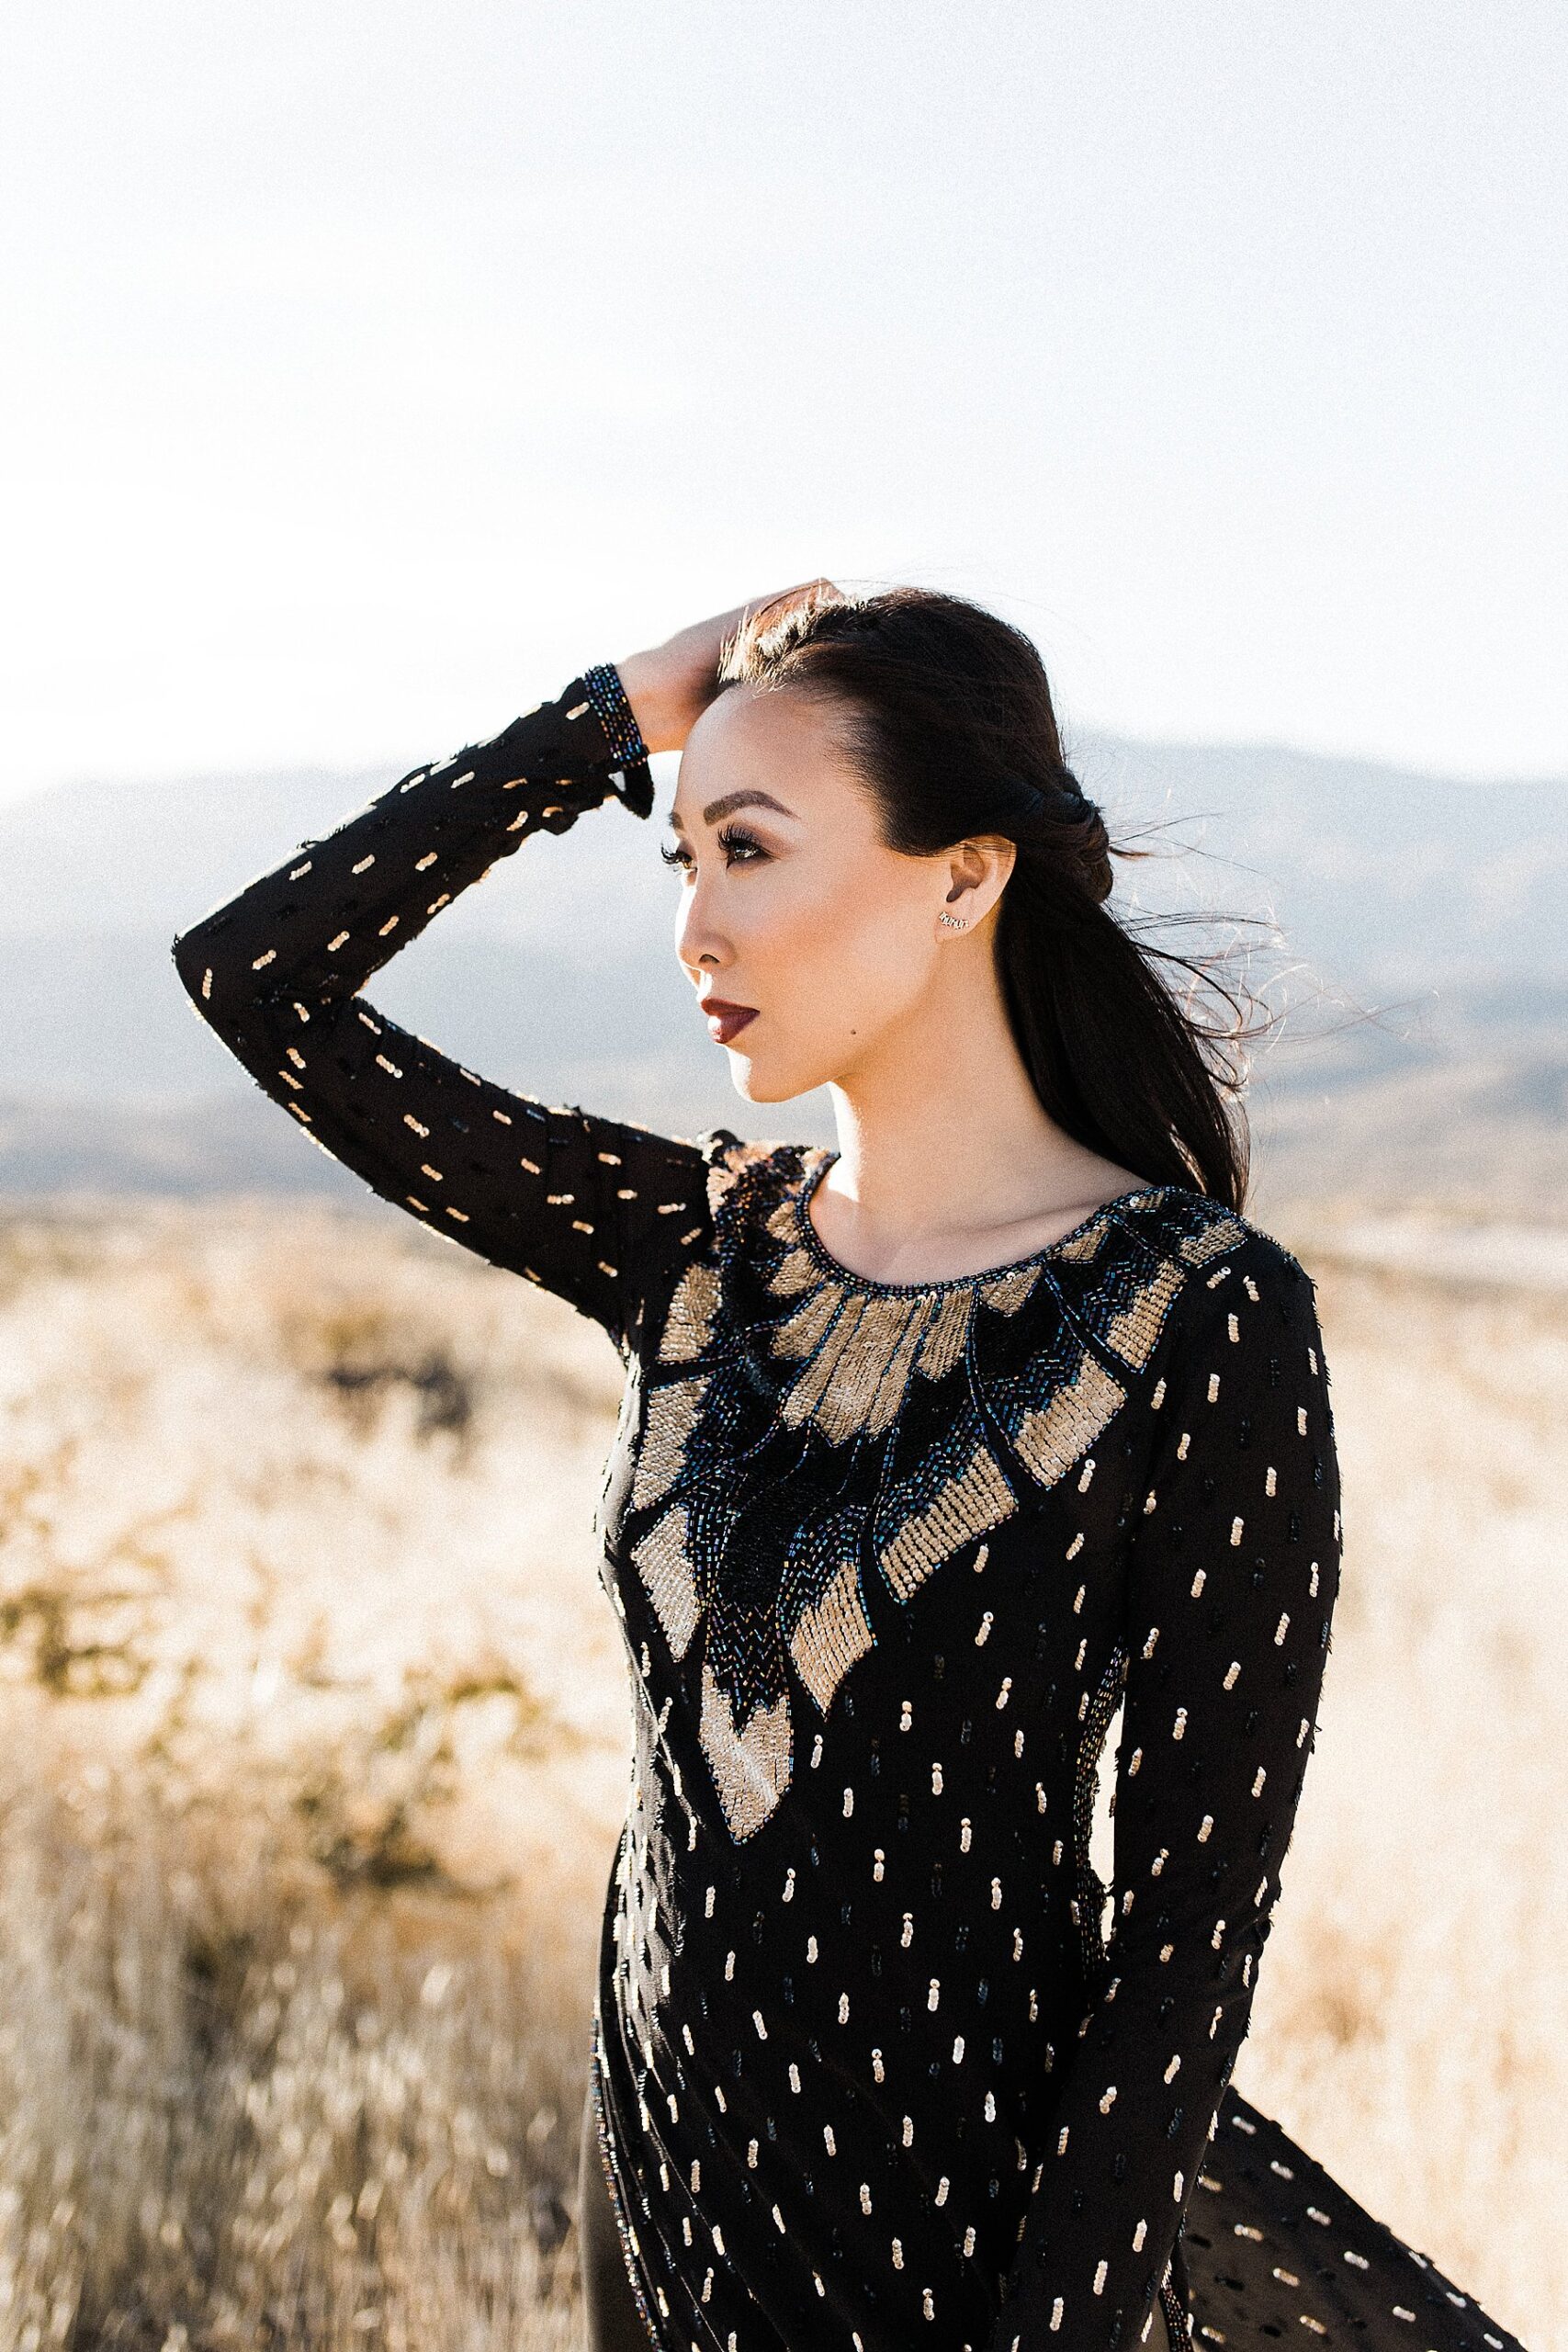 Golden hour light in dry phoenix arizona fields in black gown from Calypso st. Barths // Lifestyle blogger Diana Elizabeth